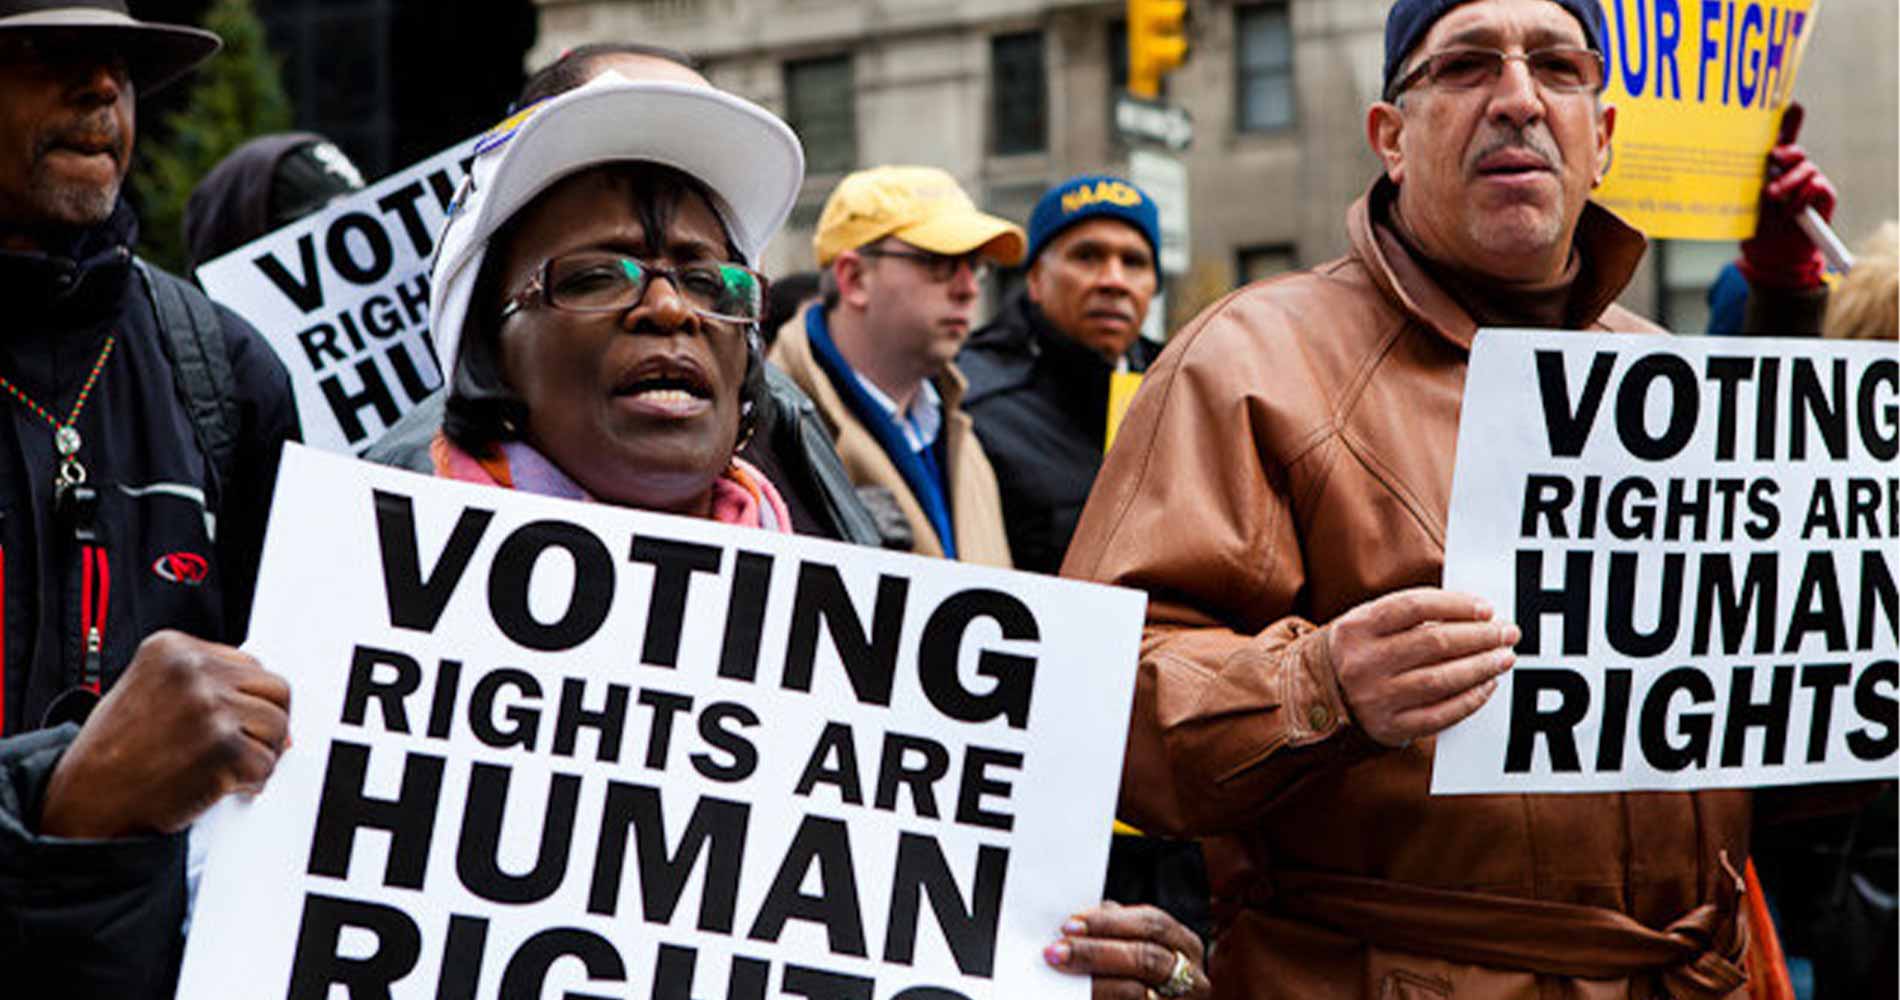 Virginia Governor Restores Voting Rights To Over 69000 Formerly Incarcerated Citizens 8804